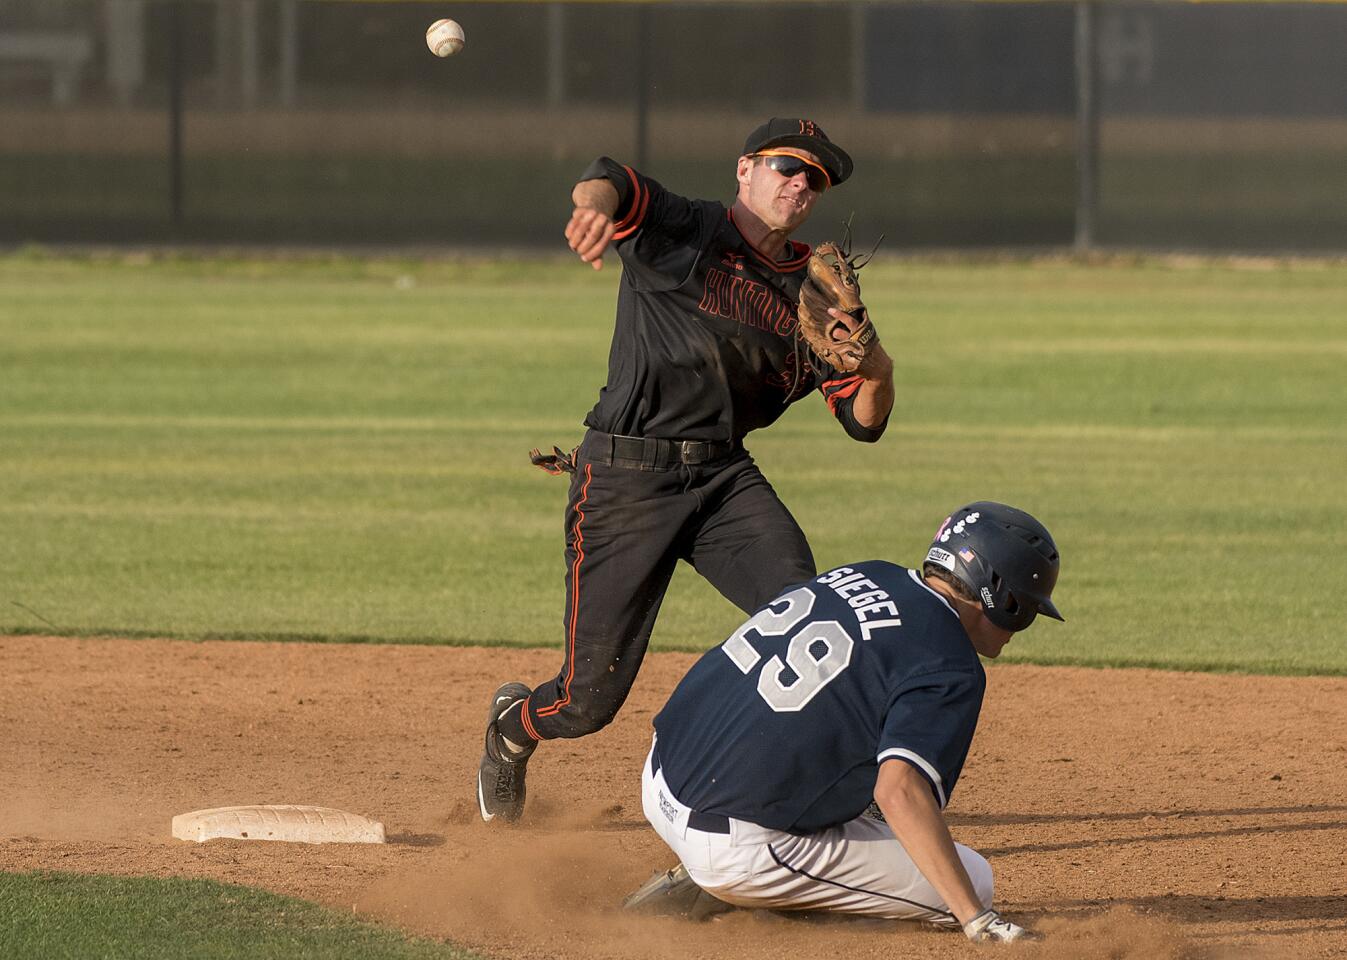 Huntington Beach's Luke Glascoe gets the force at second against Newport Harbor's Brad Siegel and turns the double play to end the game on Wednesday, April 11.